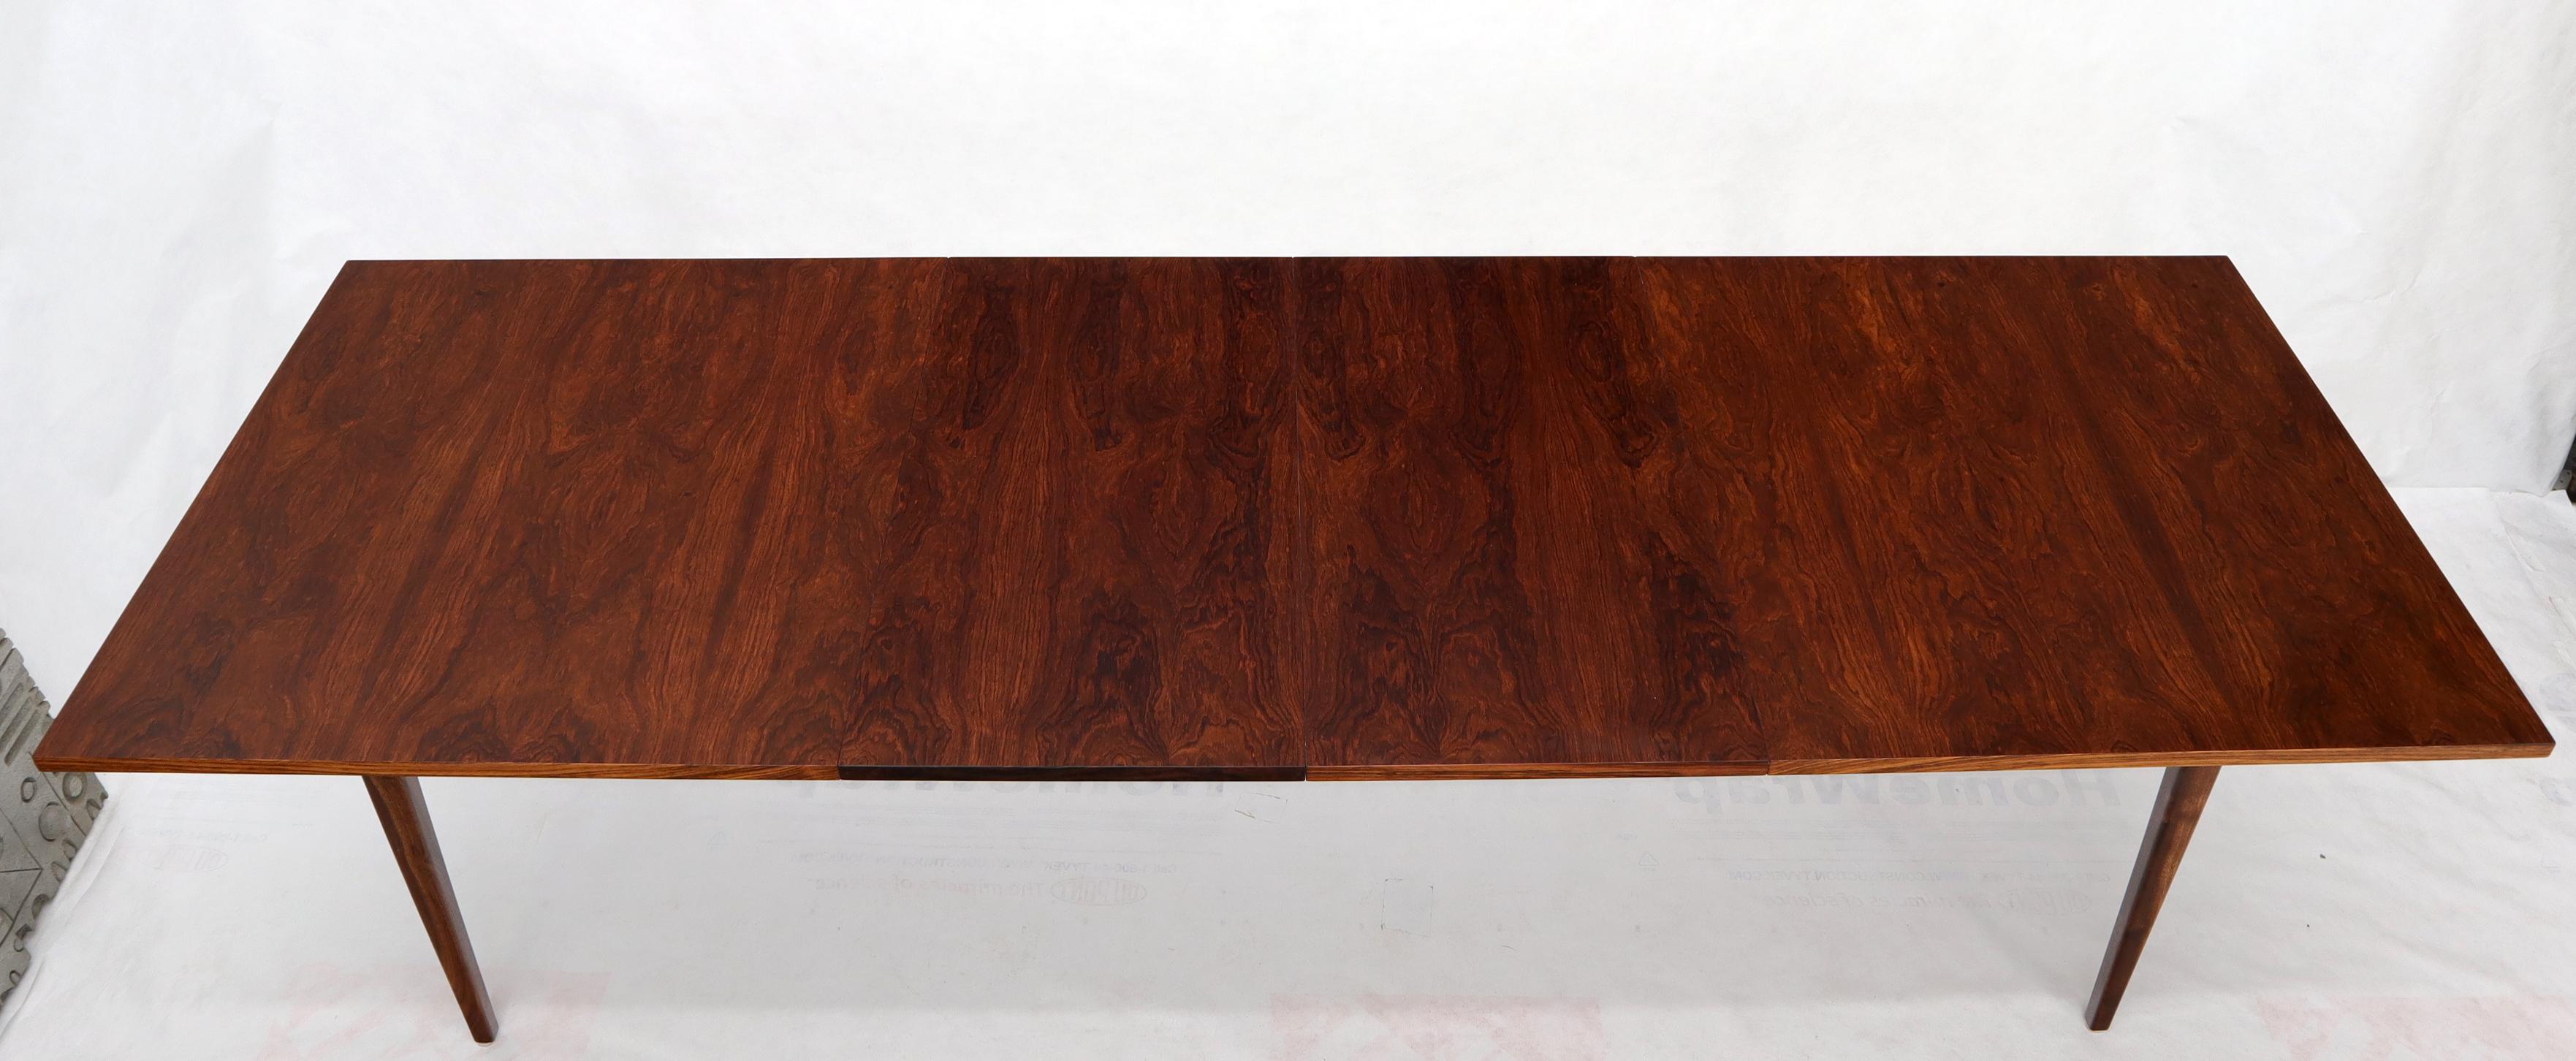 Rosewood Rectangular Dining Table by George Nelson for Herman Miller 2 Leaves For Sale 2